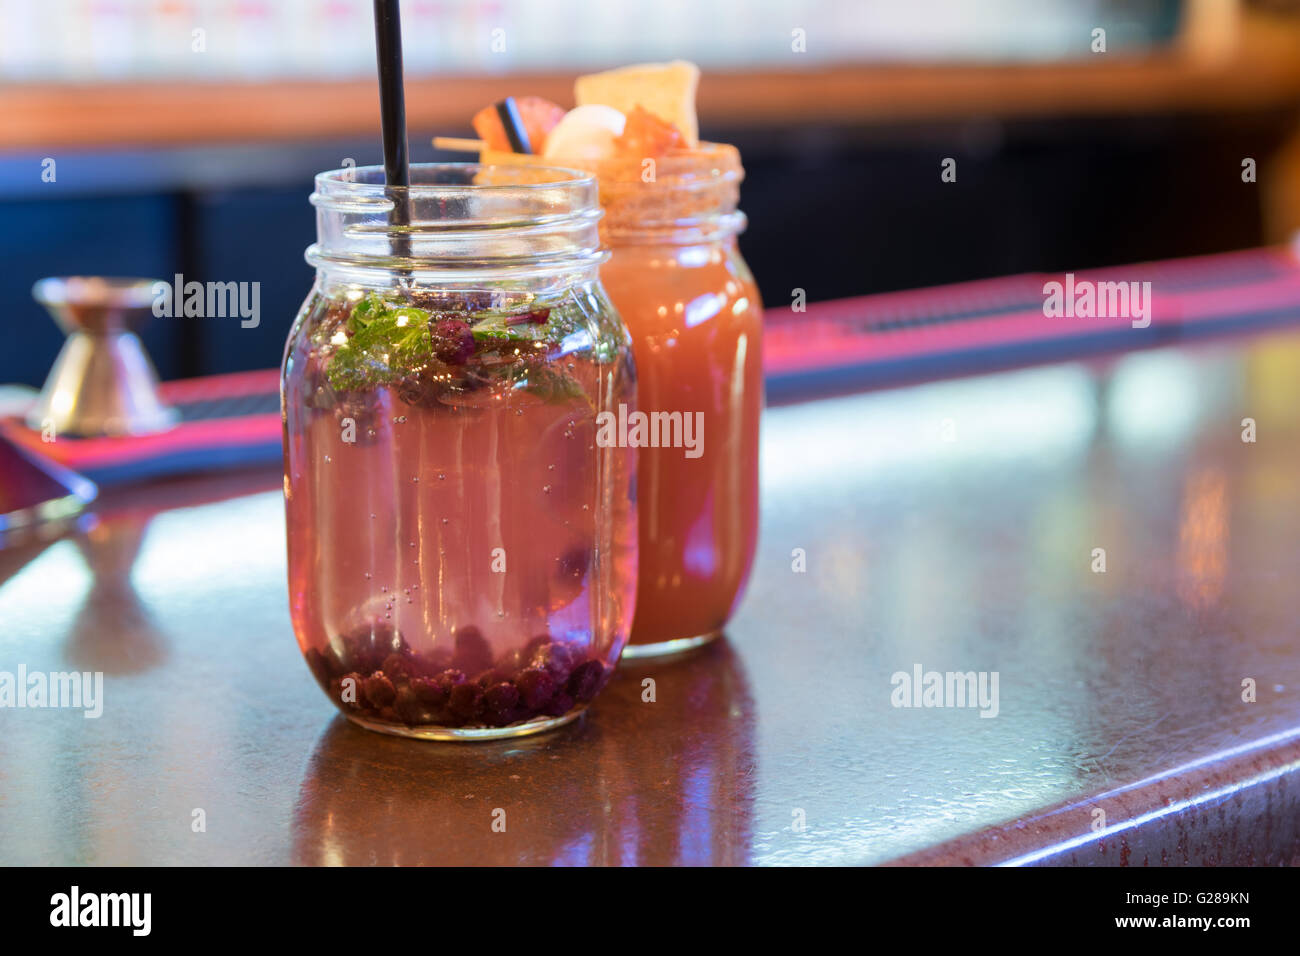 Delicious alcoholic cocktails, freshly made and ready to drink. Stock Photo